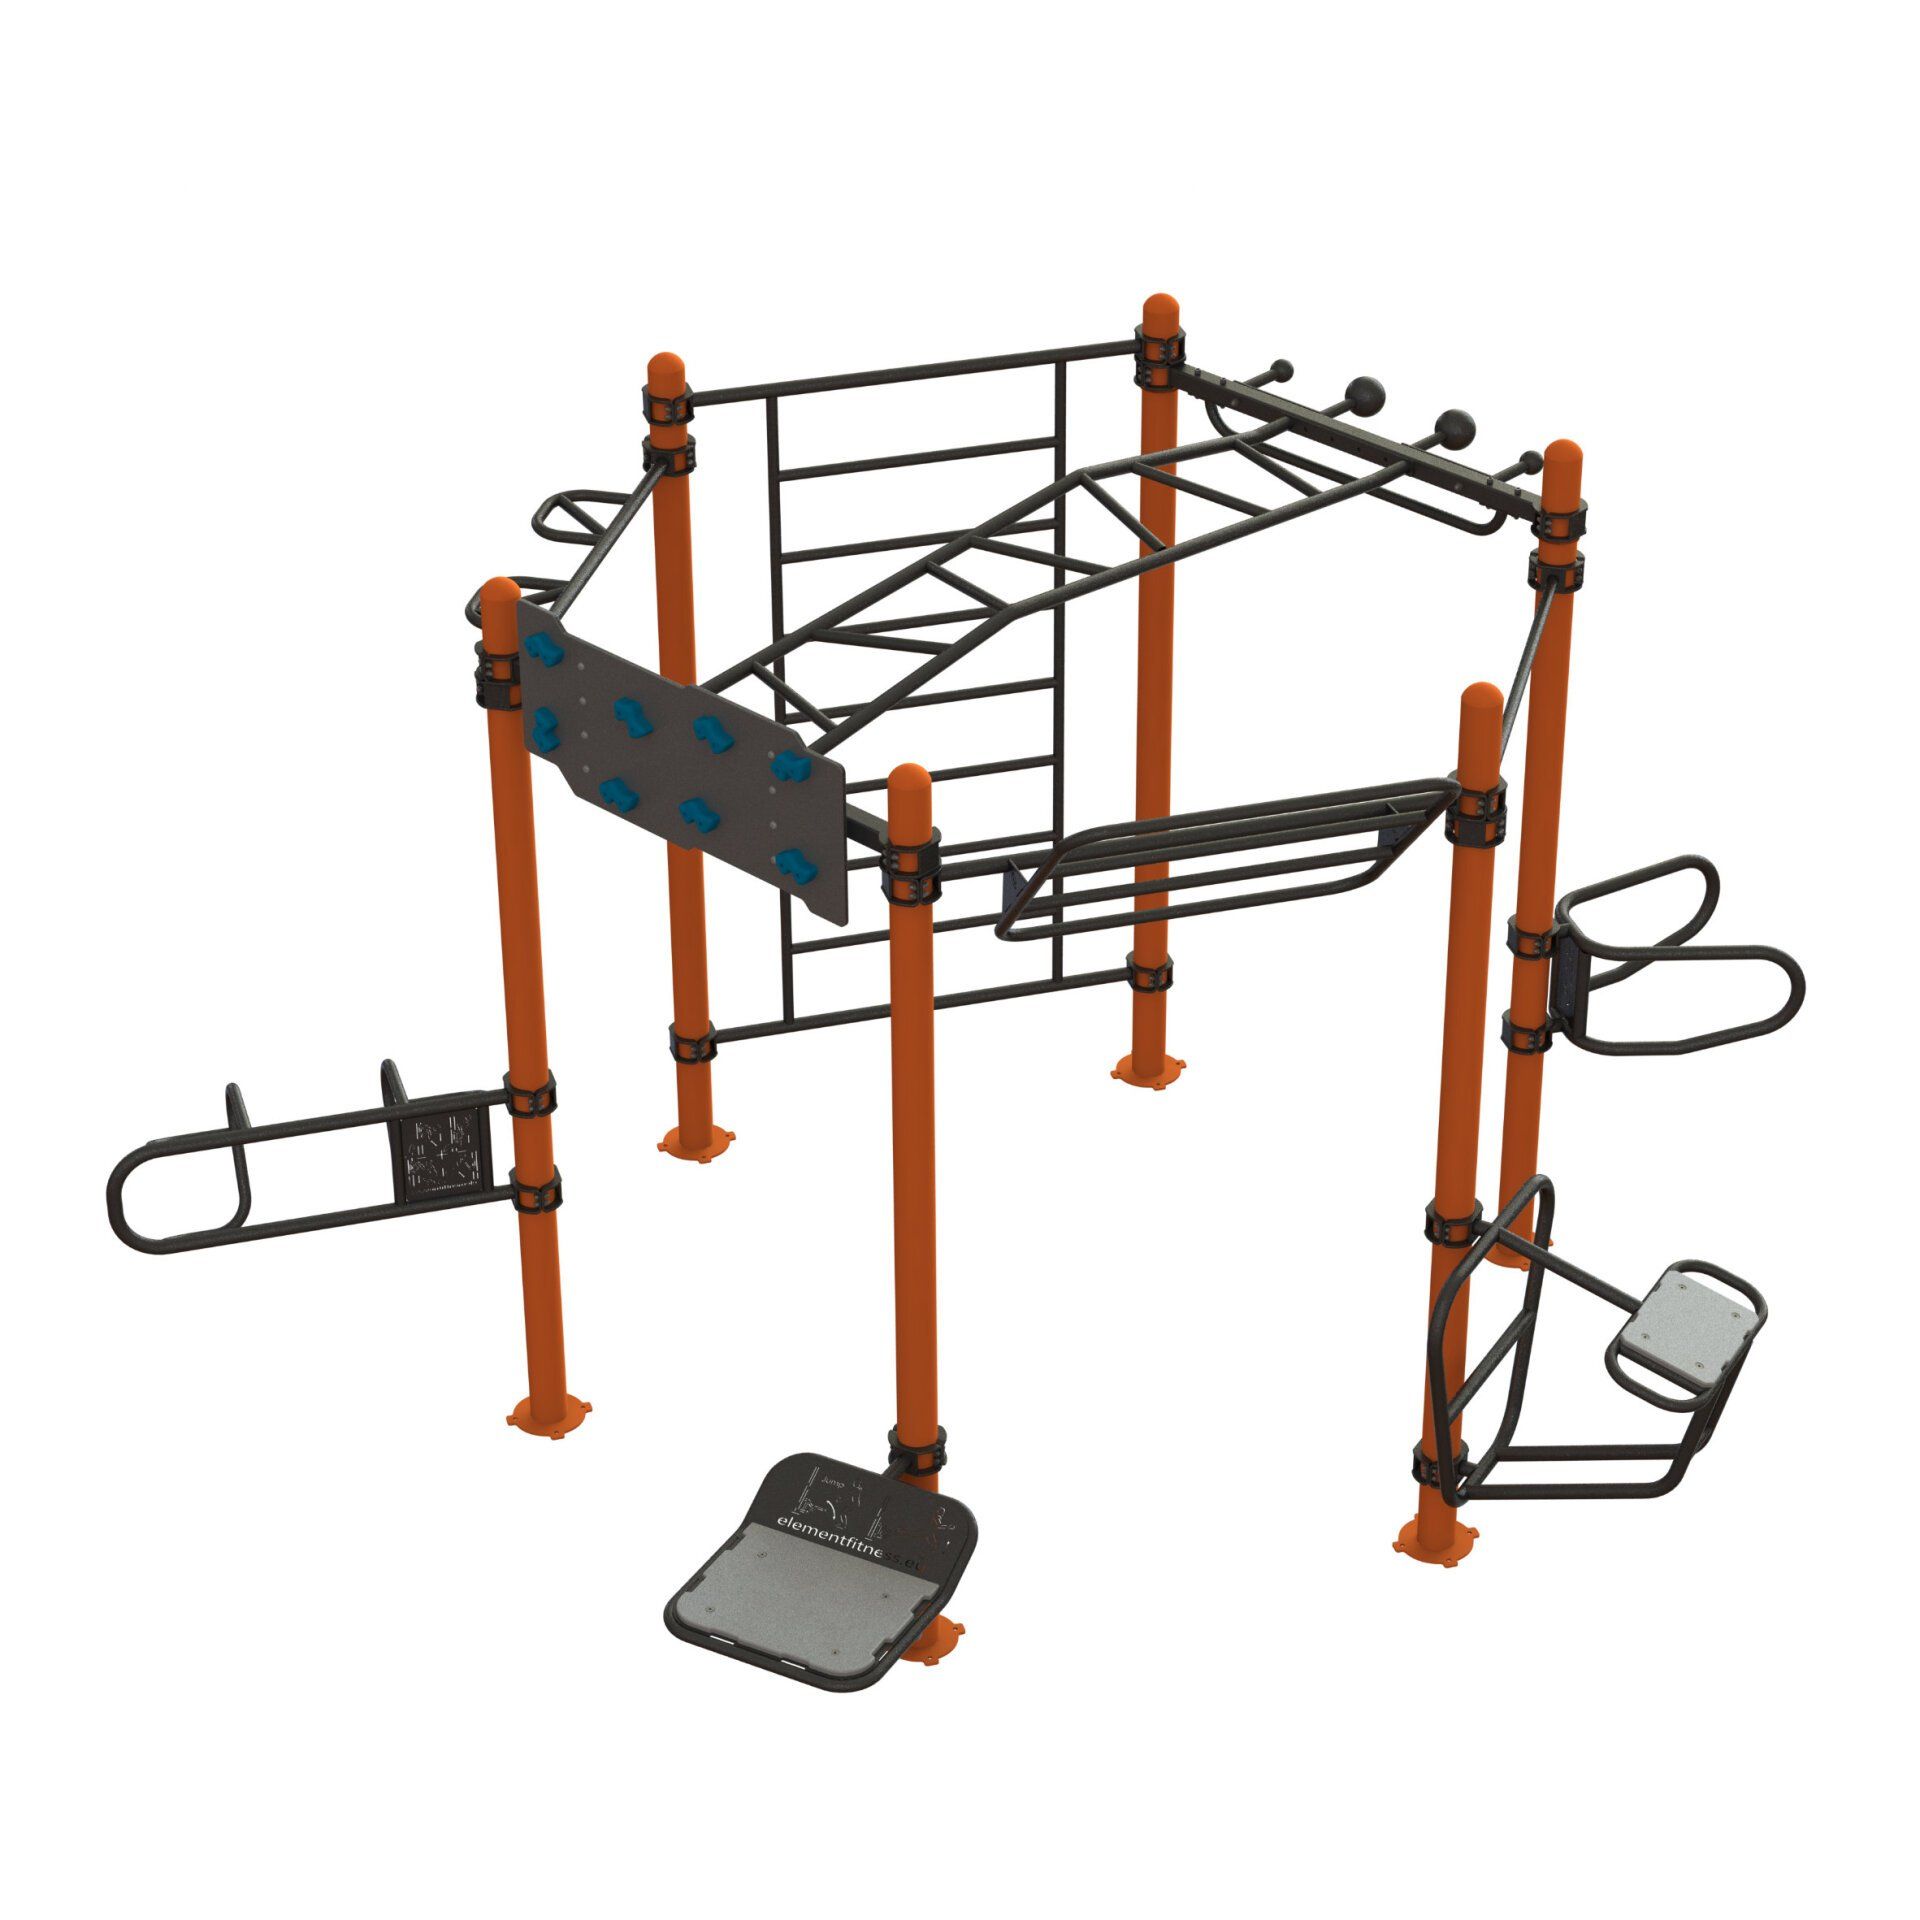 OPTELE-3003870D4 OptiFit Element Outdoor Fitness Station 5